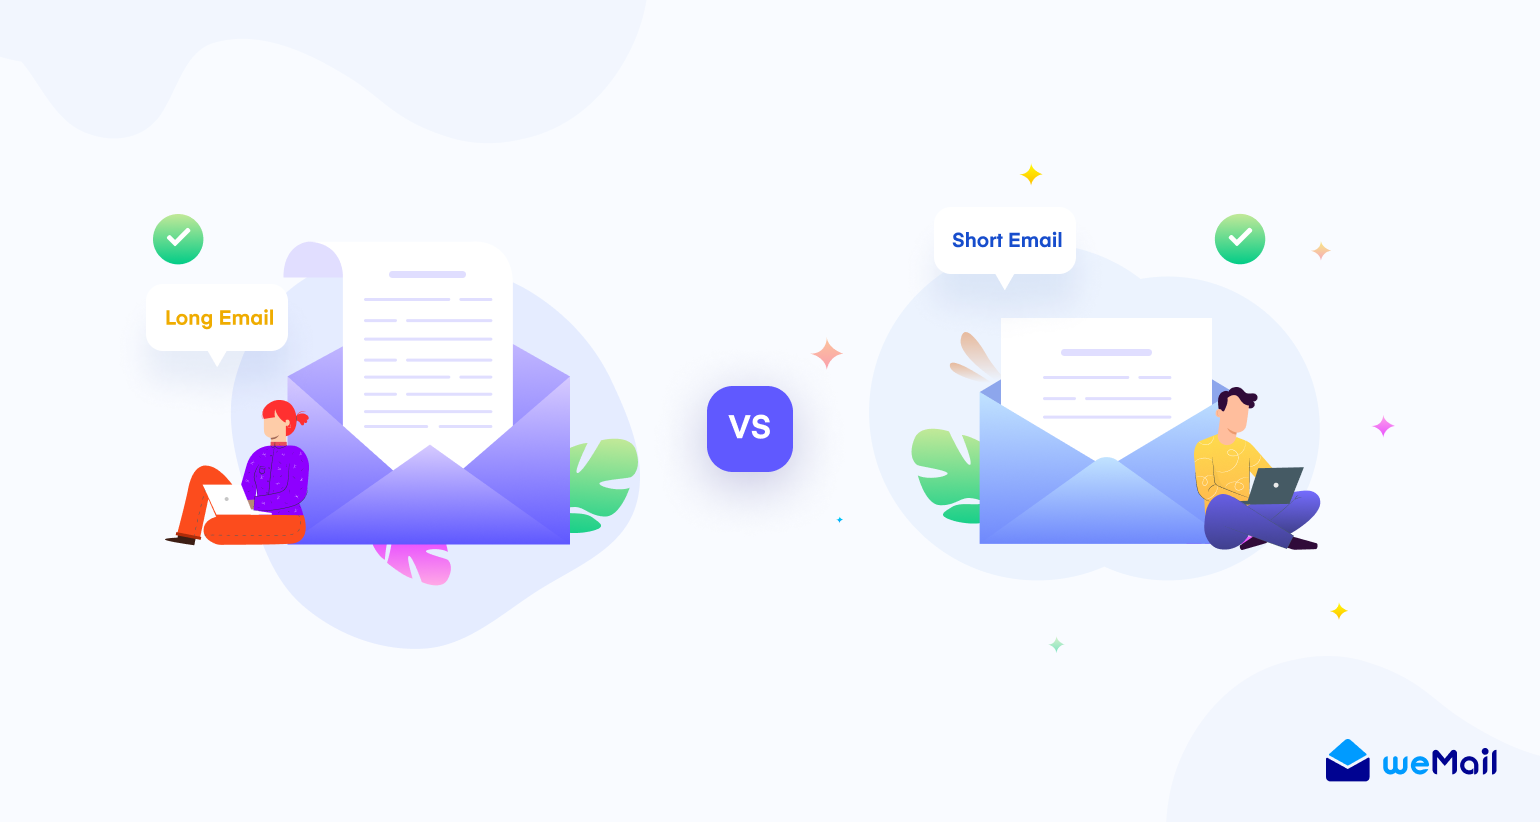 Why long emails are better?